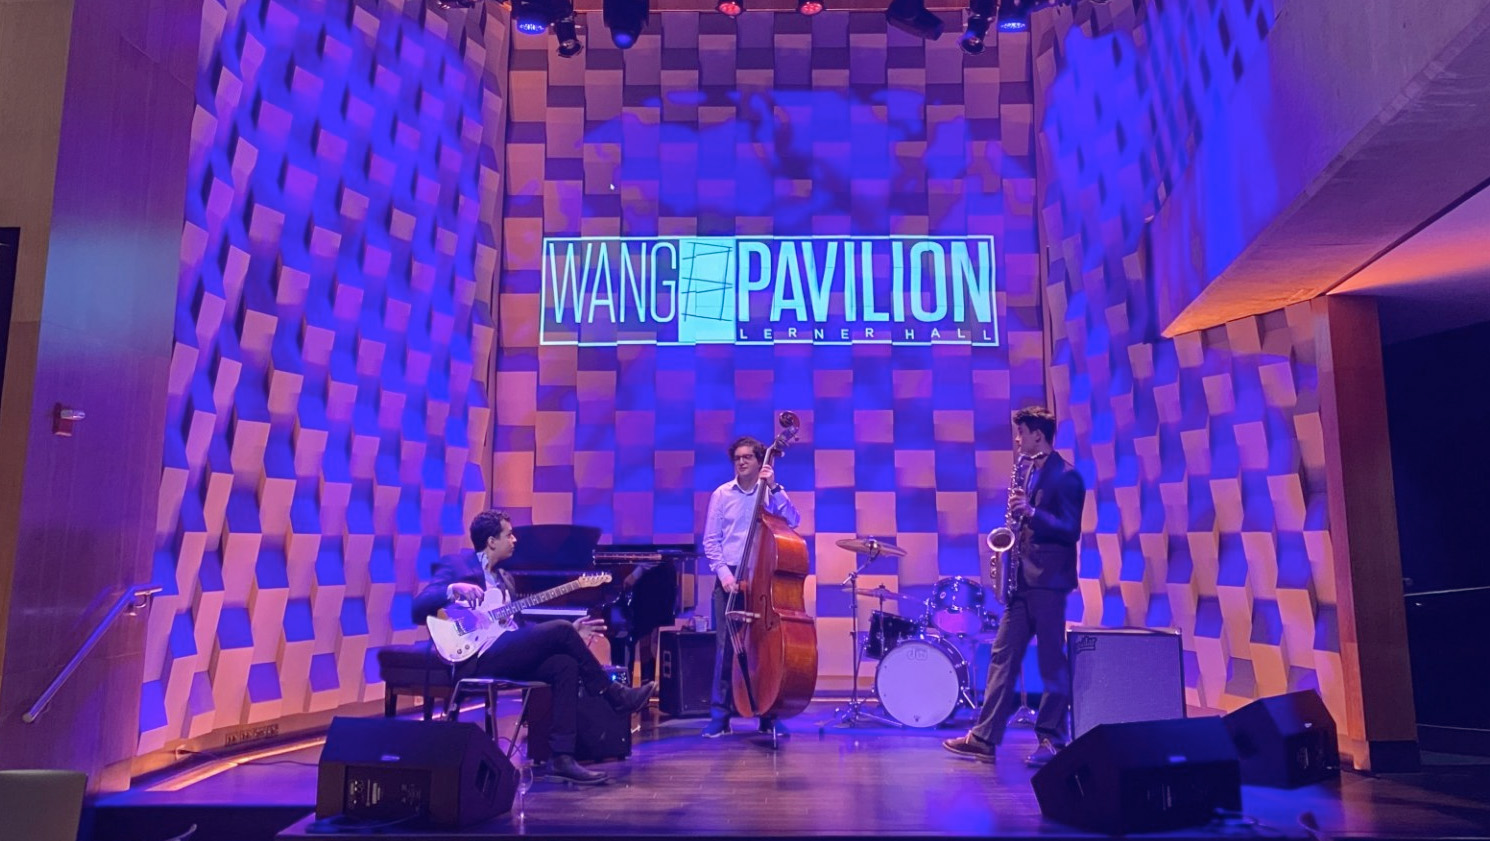 A jazz trio jams out on the stage of the Wang Pavilion, which has purple and pink lights illuminating the wall behind them.